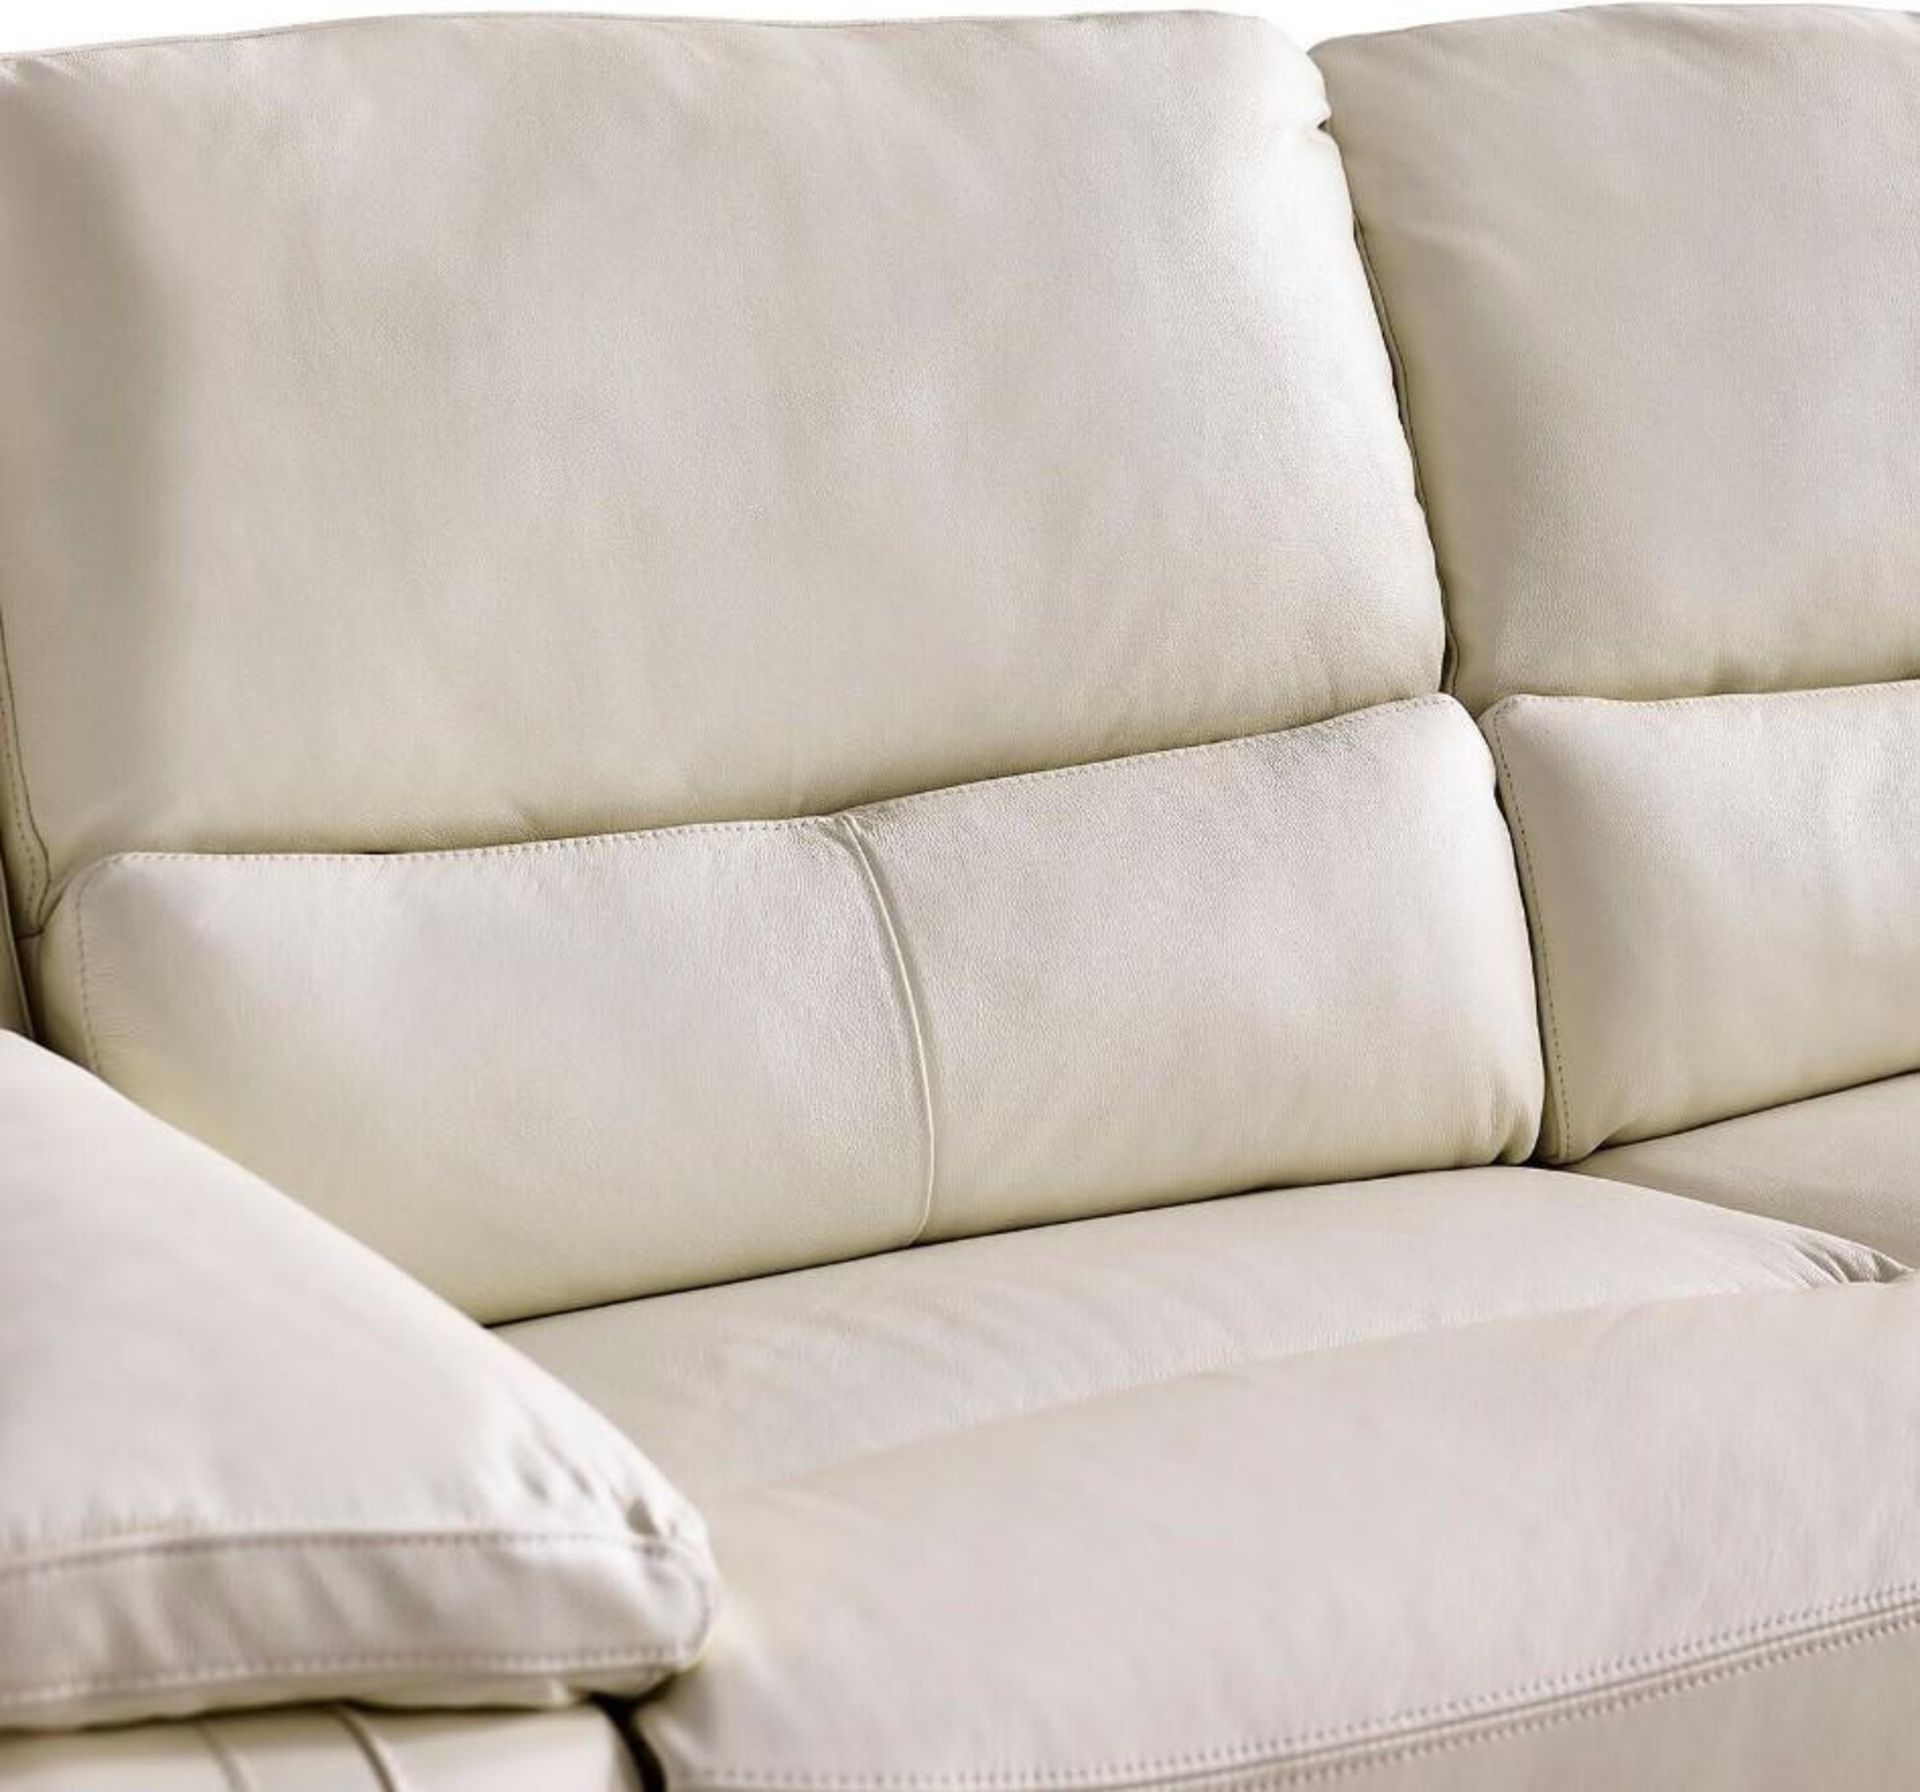 Brand new and boxed SCS Fallon 3 seater electric reclining sofa in Cream. - Bild 5 aus 7